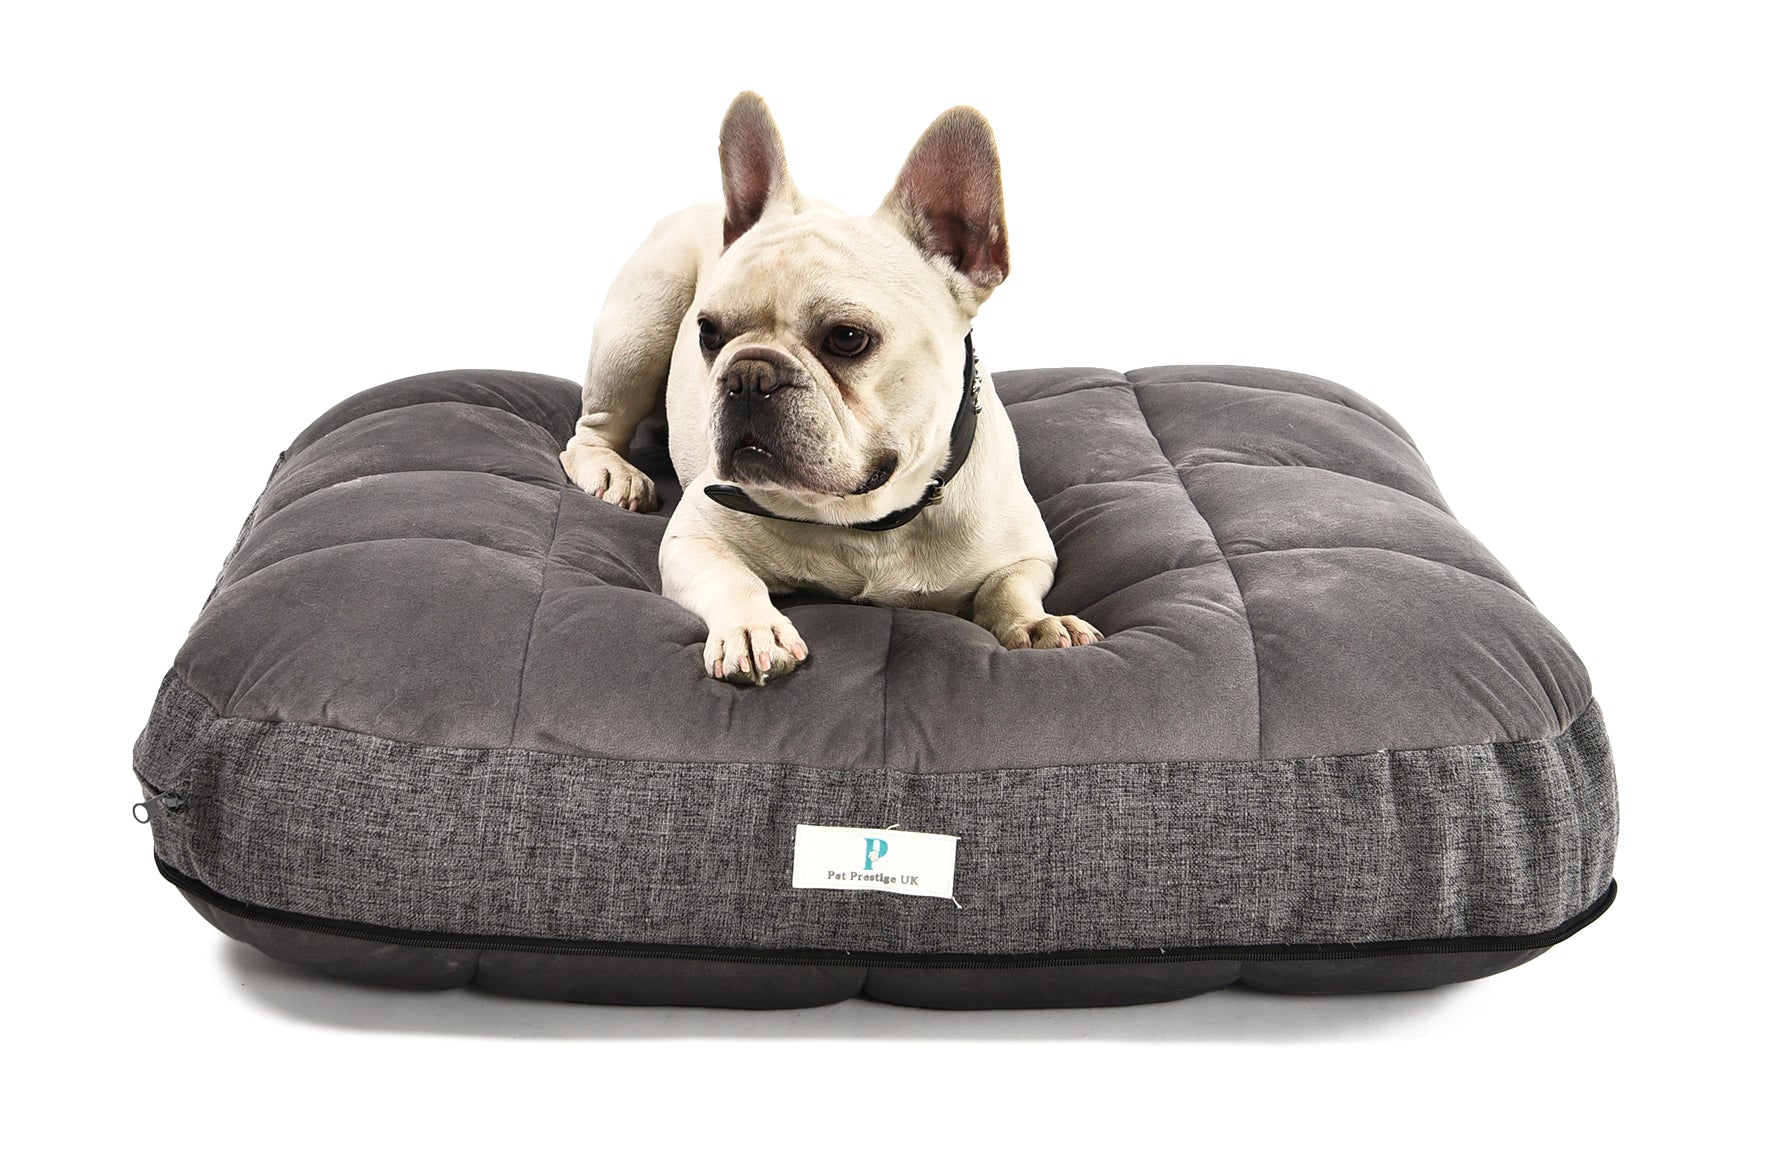 How to choose the best-shaped dog bed for your pet?